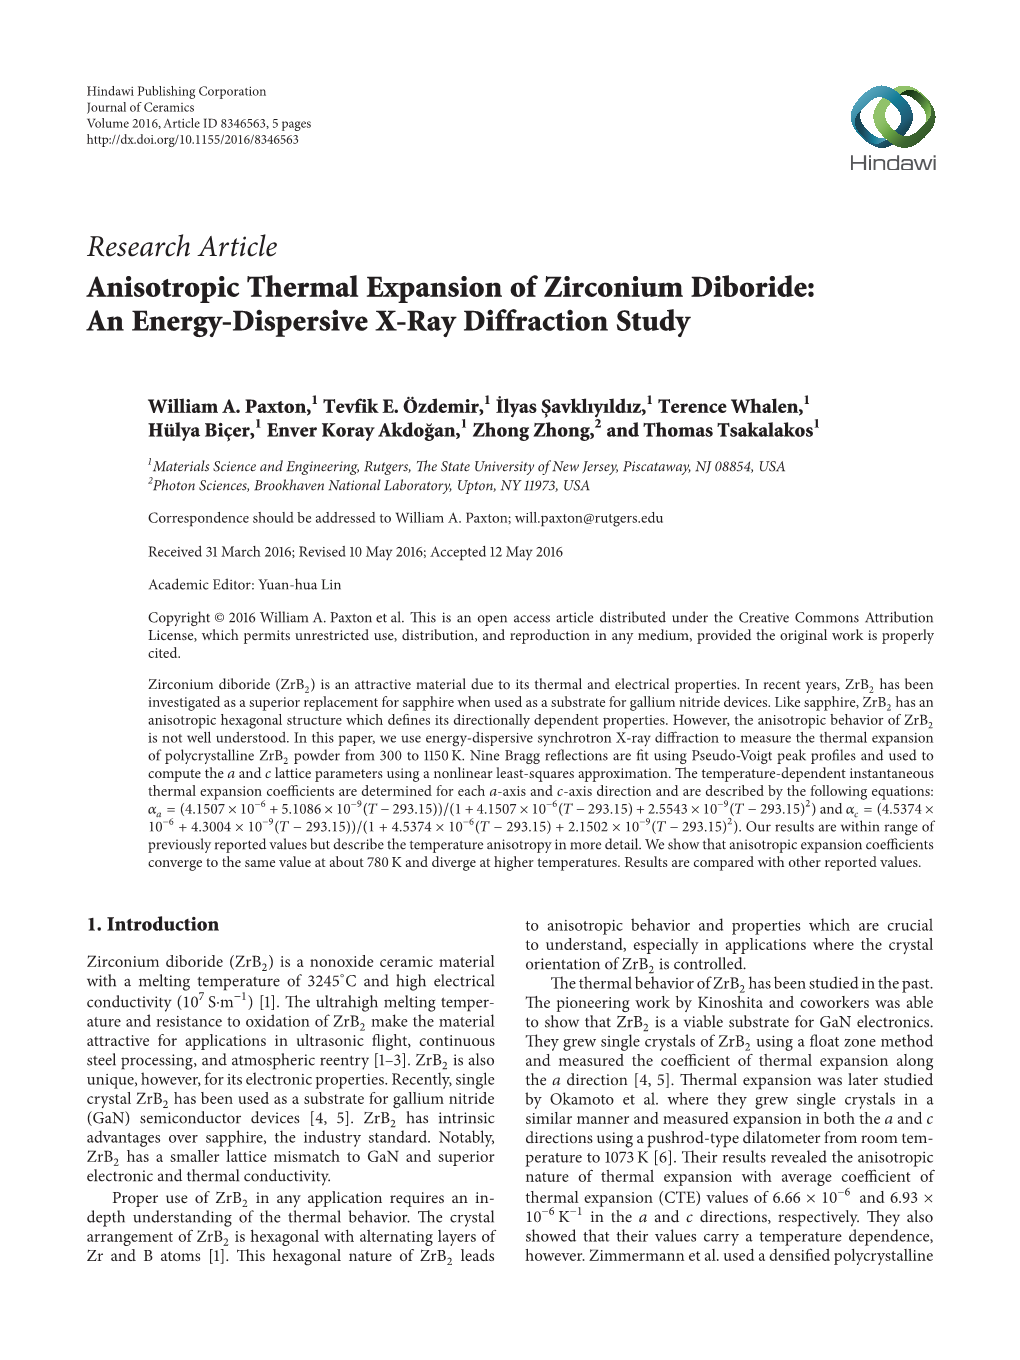 Research Article Anisotropic Thermal Expansion of Zirconium Diboride: an Energy-Dispersive X-Ray Diffraction Study